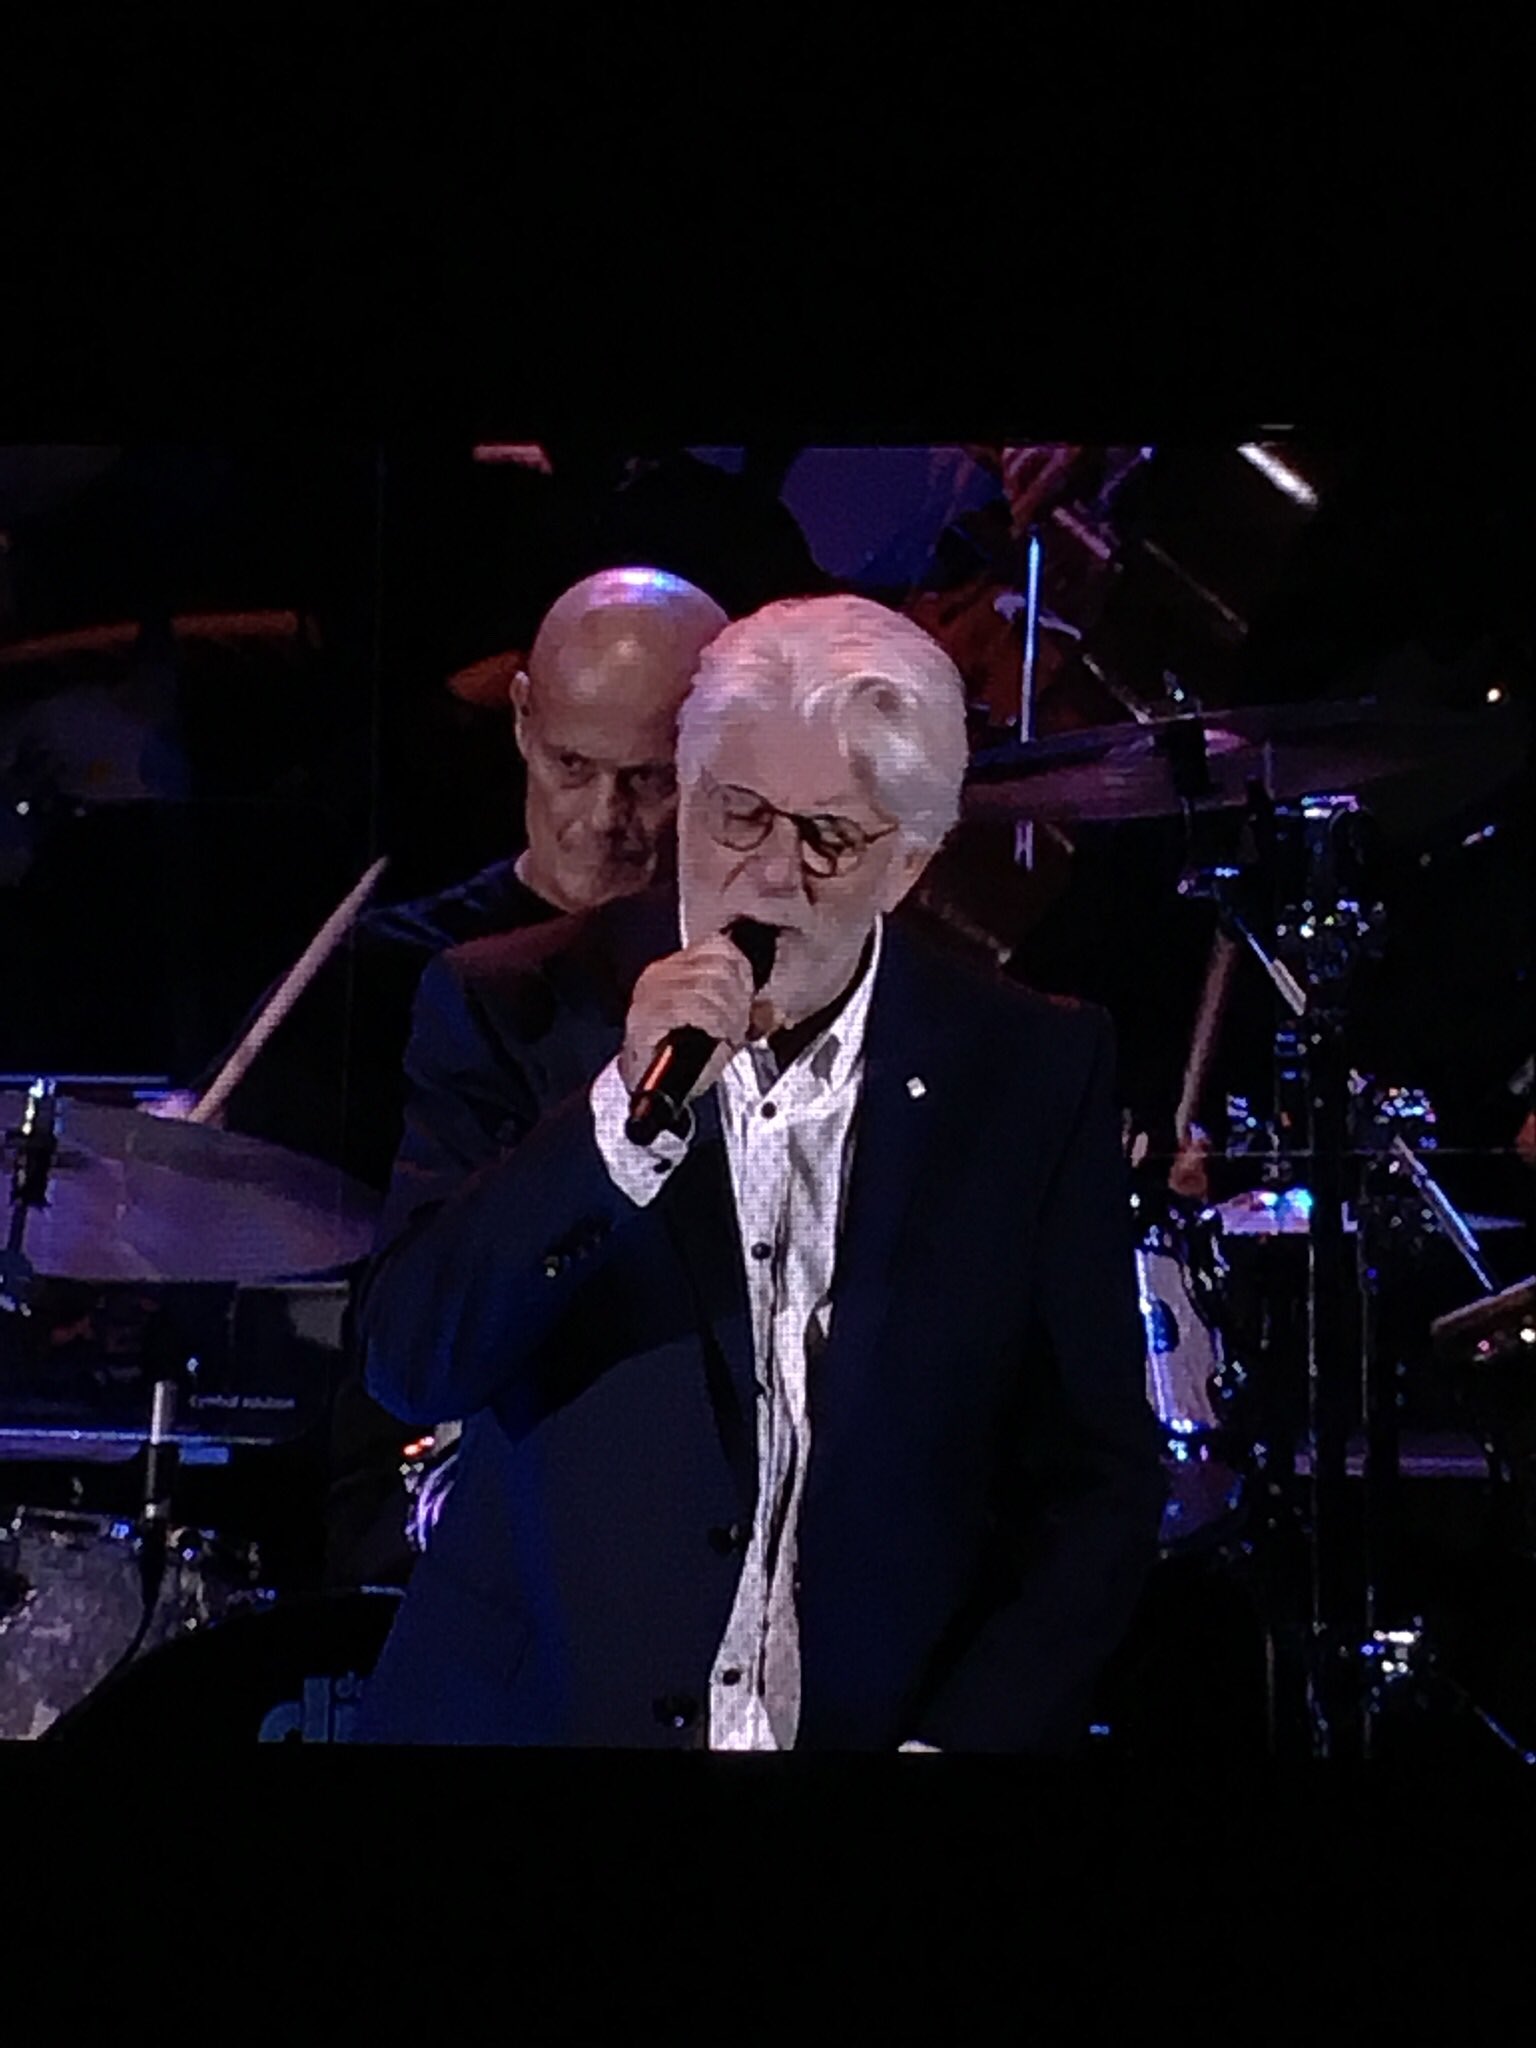 Happy Birthday every minute by minute by minute to Michael McDonald!!! 